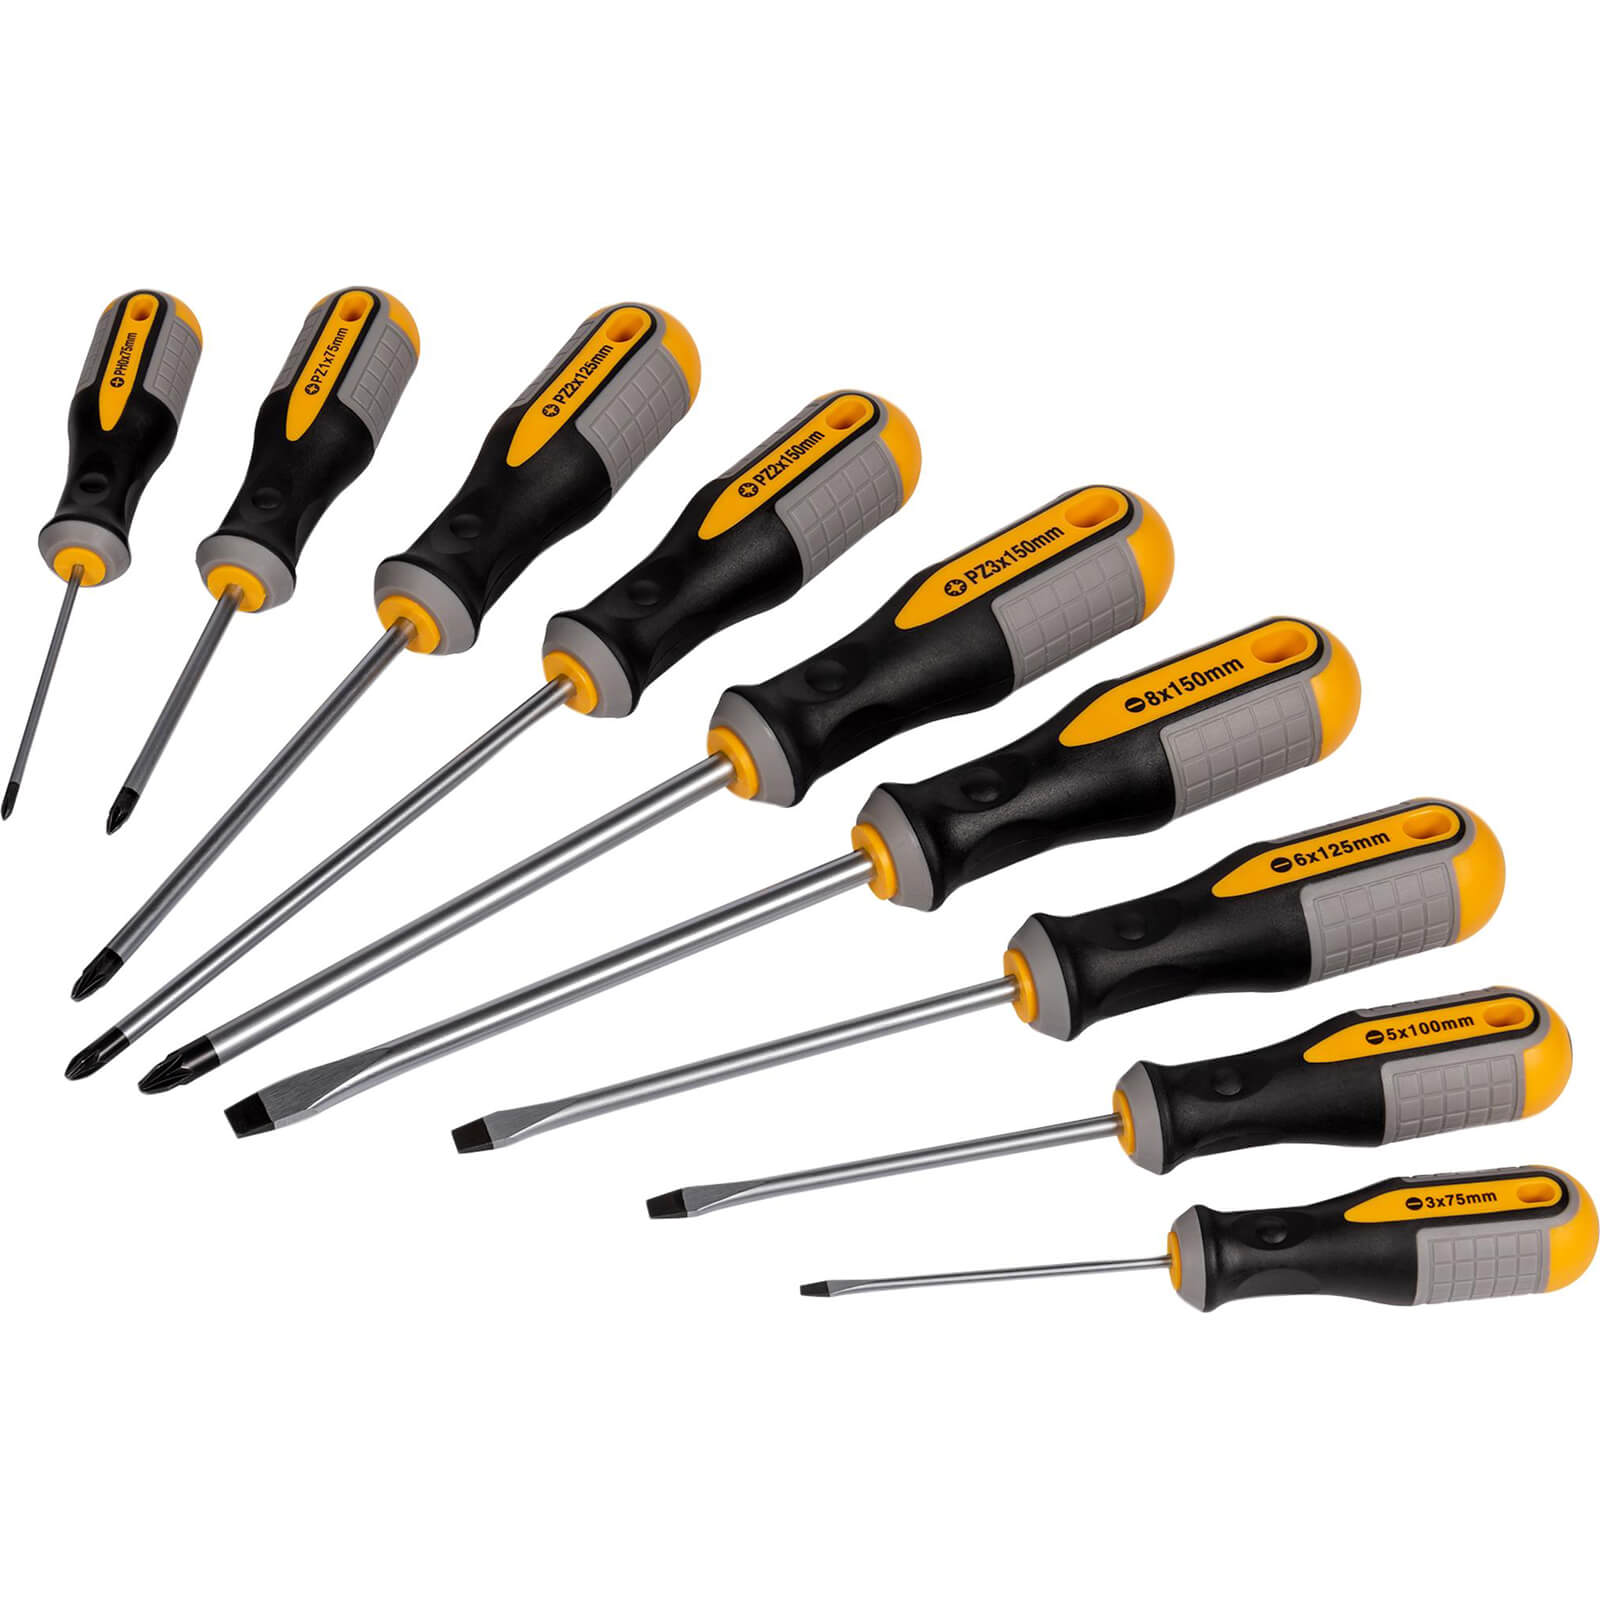 Image of Roughneck 9 Piece Magnetic Screwdriver Set